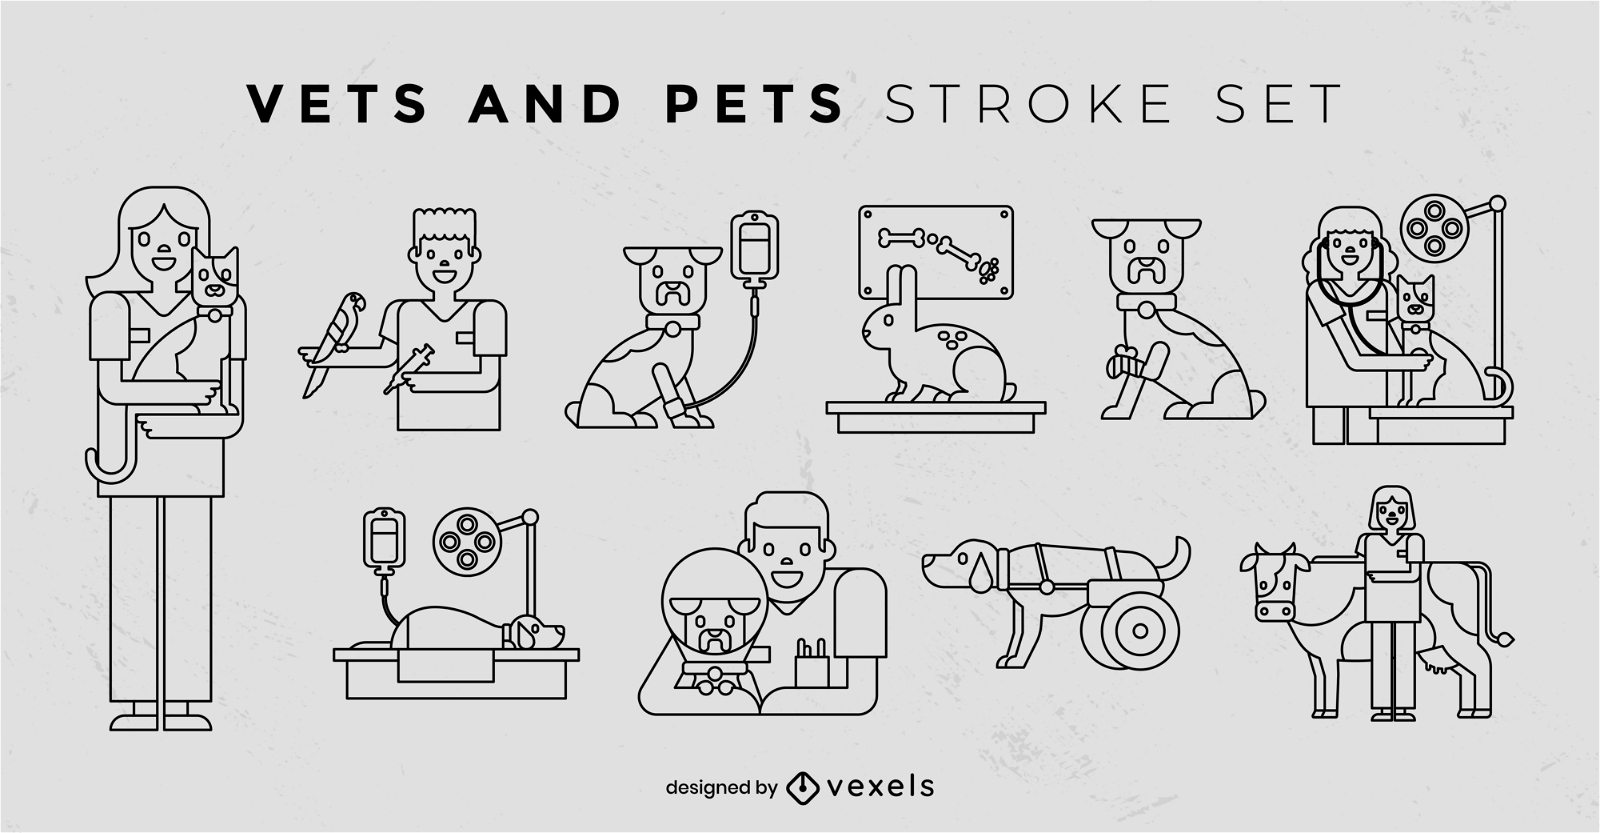 Vets and pets stroke character set